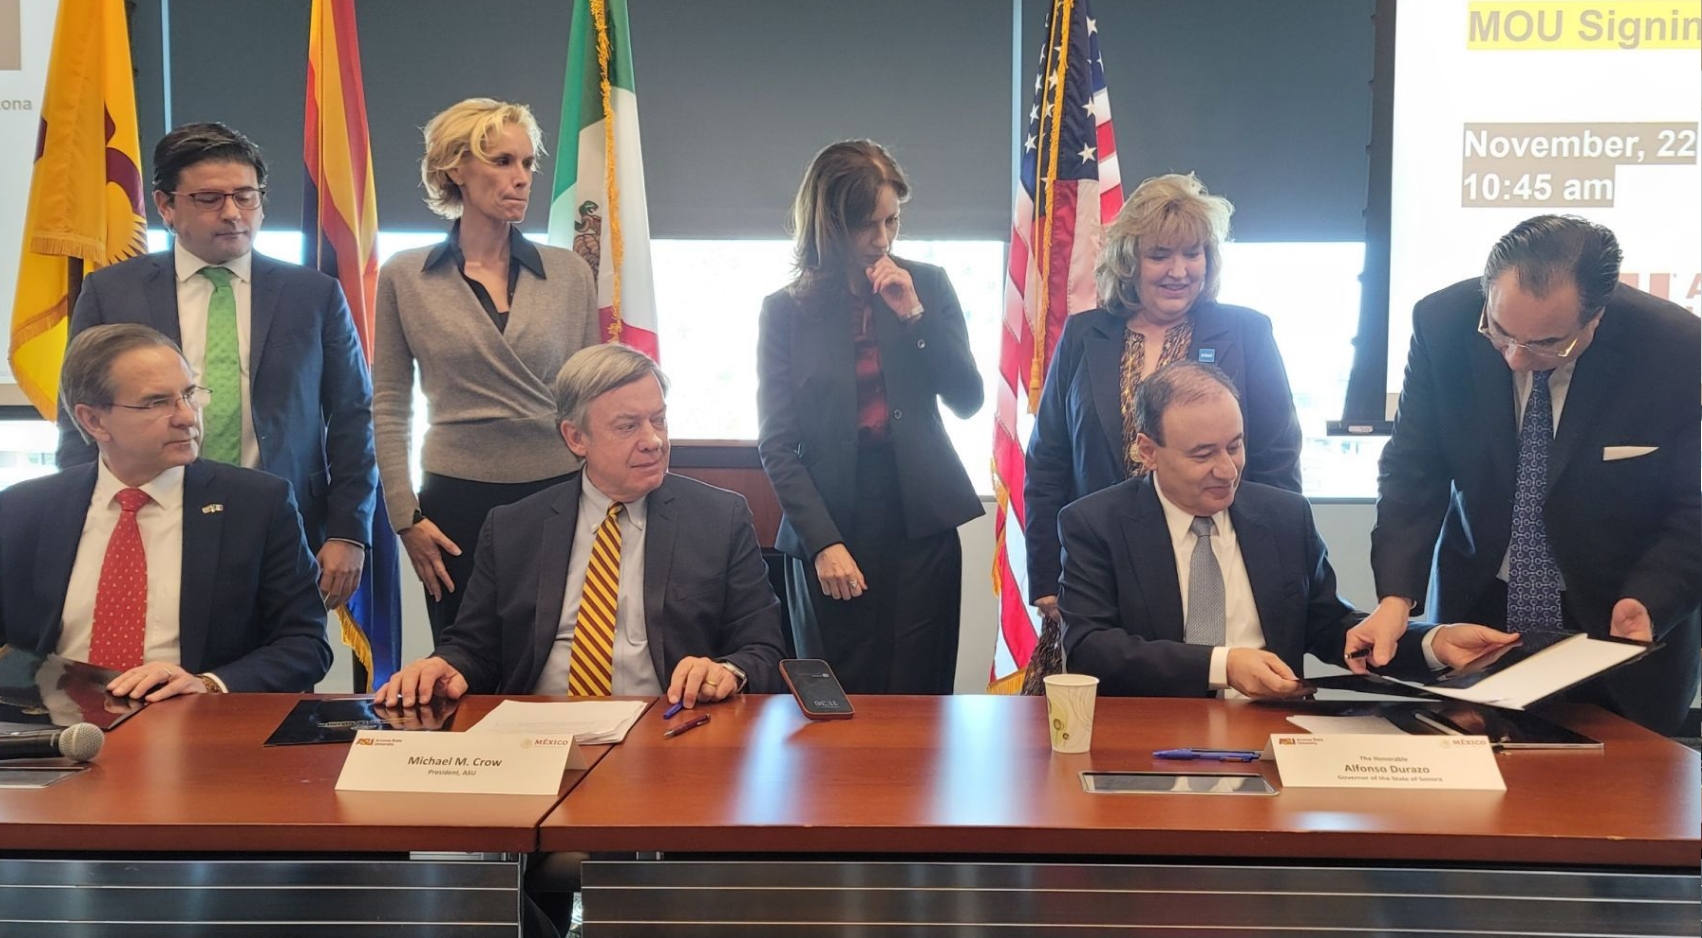 Octavio Martnez (far right) signs as honorary witness the MOU on semiconductor cooperation between the US and Mexico.